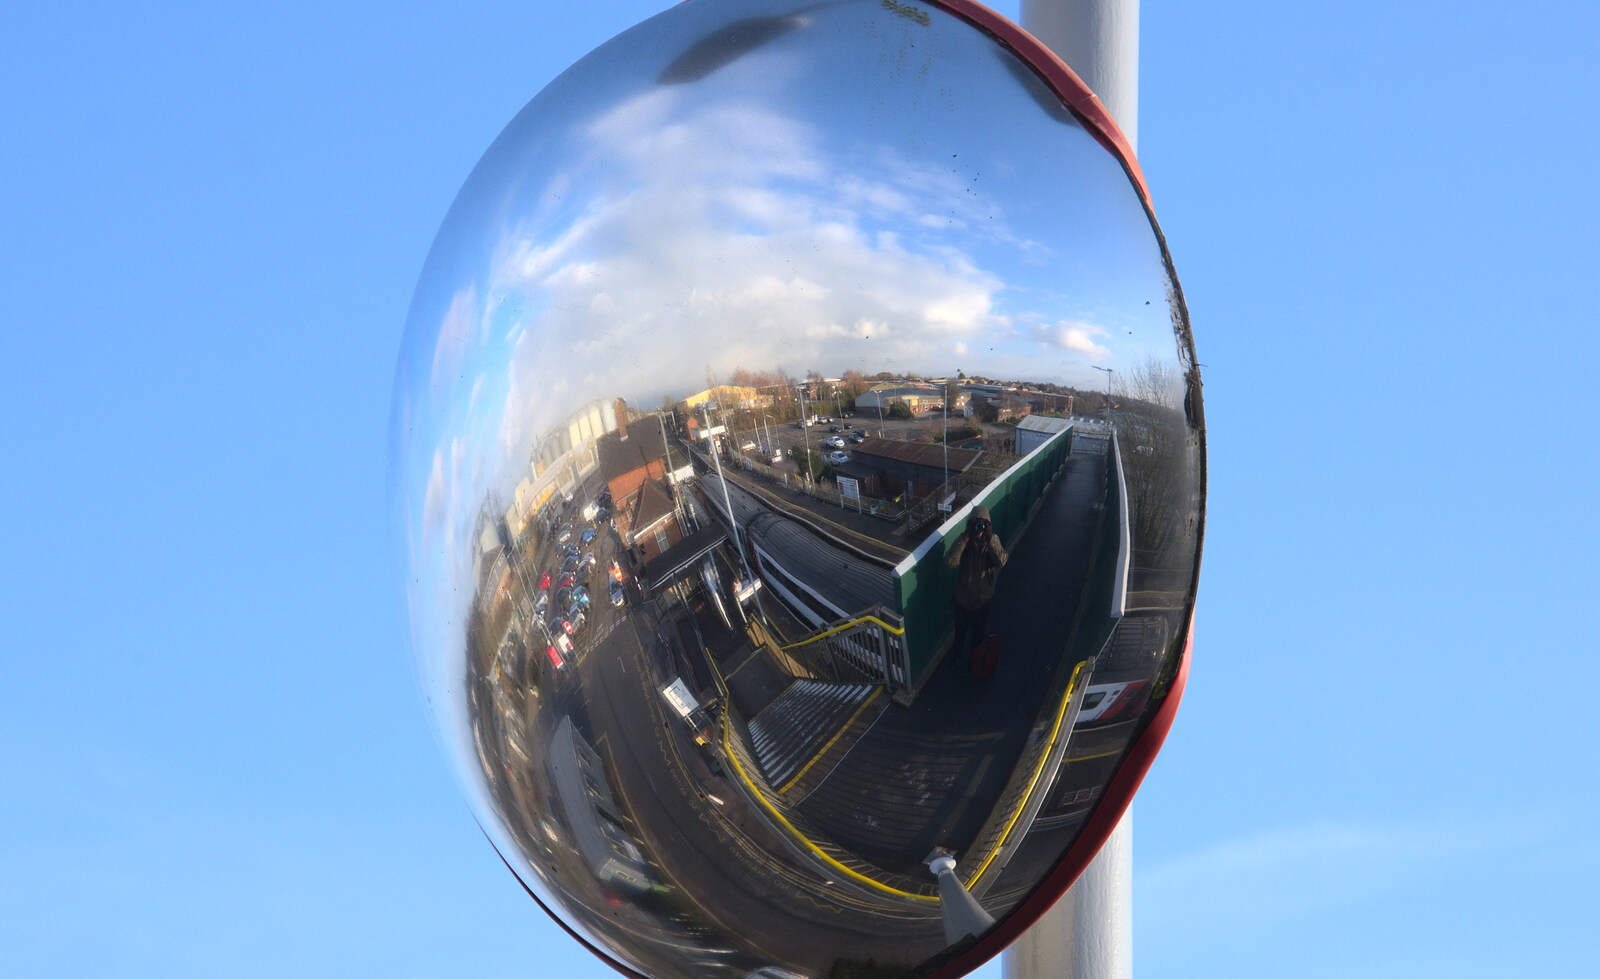 Diss railway station in a convex mirror from A Wintry Trip Down South, Walkford, Dorset - 1st February 2019